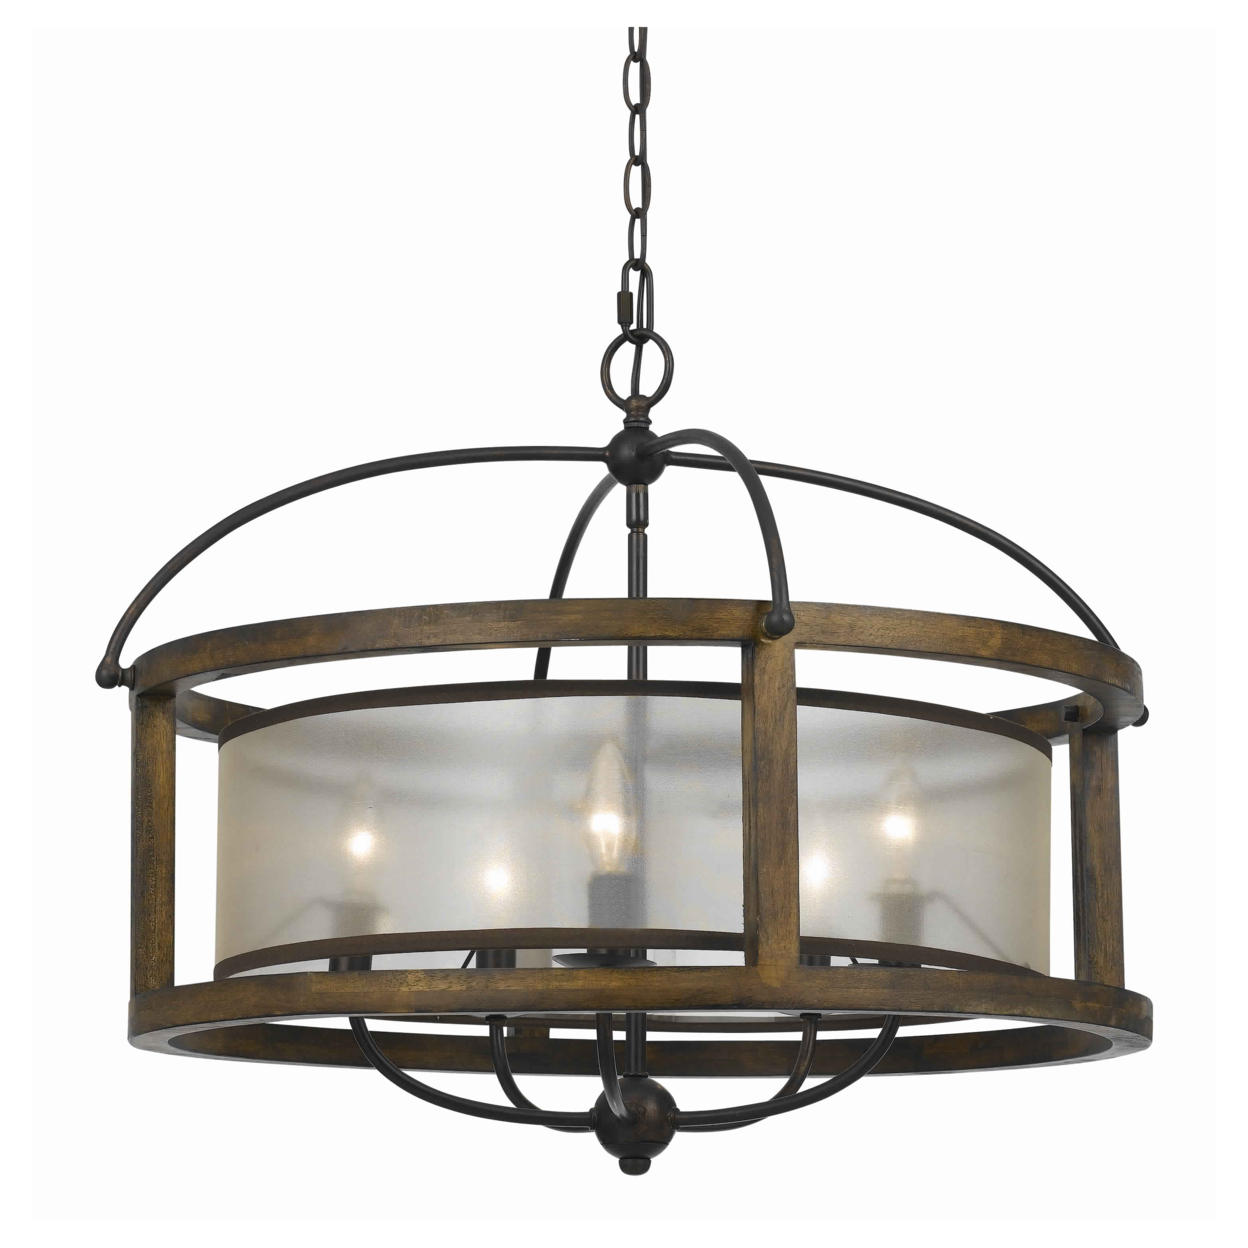 5 Bulb Round Chandelier With Wooden Frame And Organza Striped Shade, Brown- Saltoro Sherpi